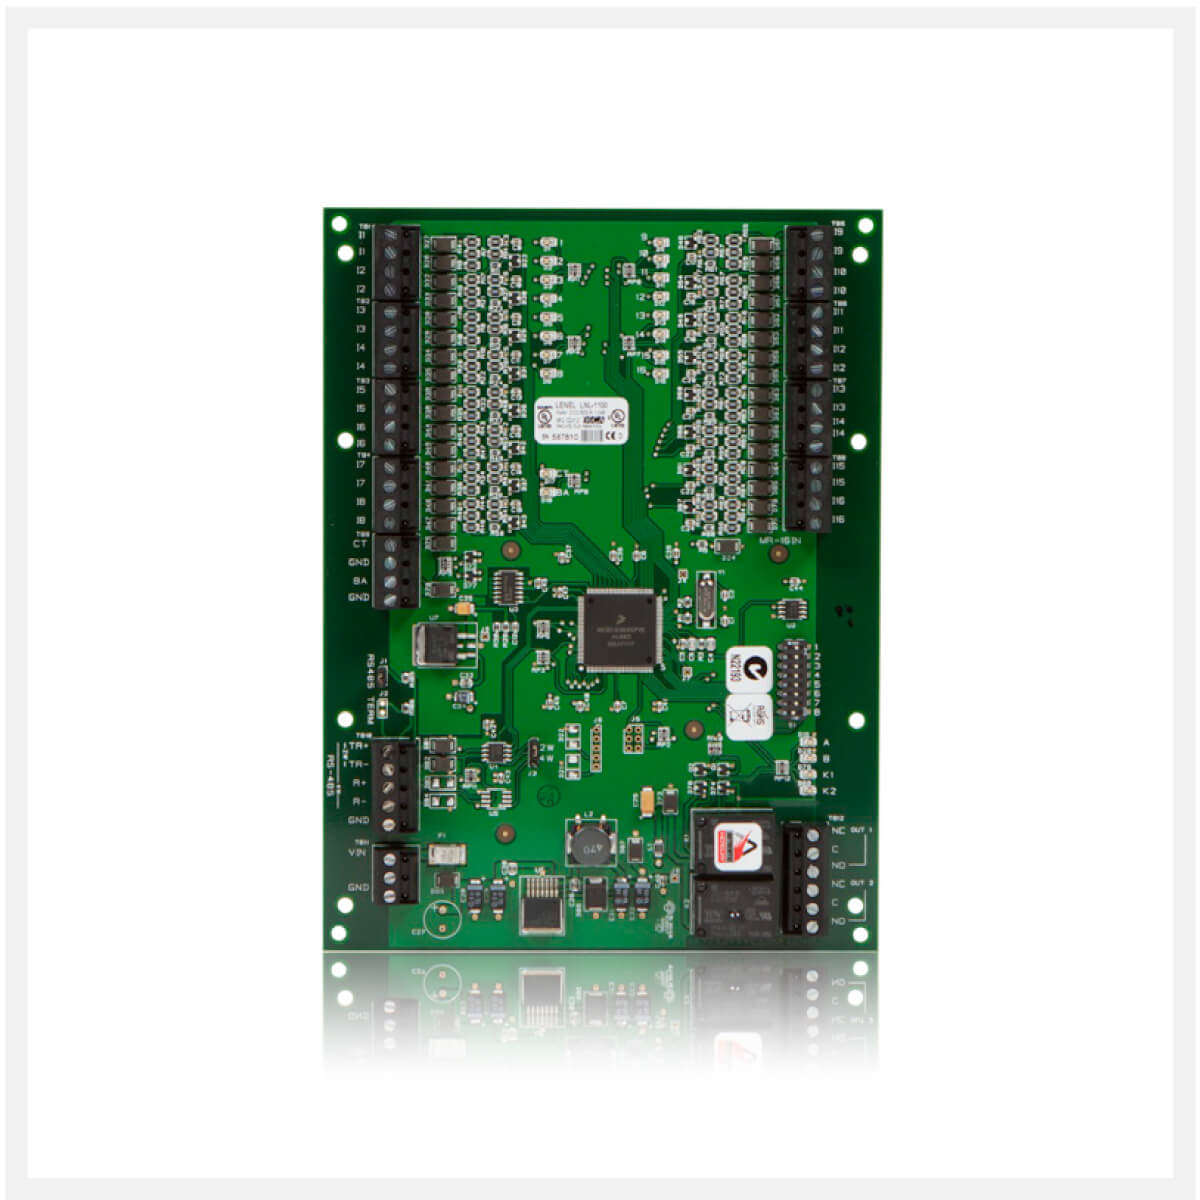 Details about   Lenel NGP-1100 Security Alarm Input Control Module Board 